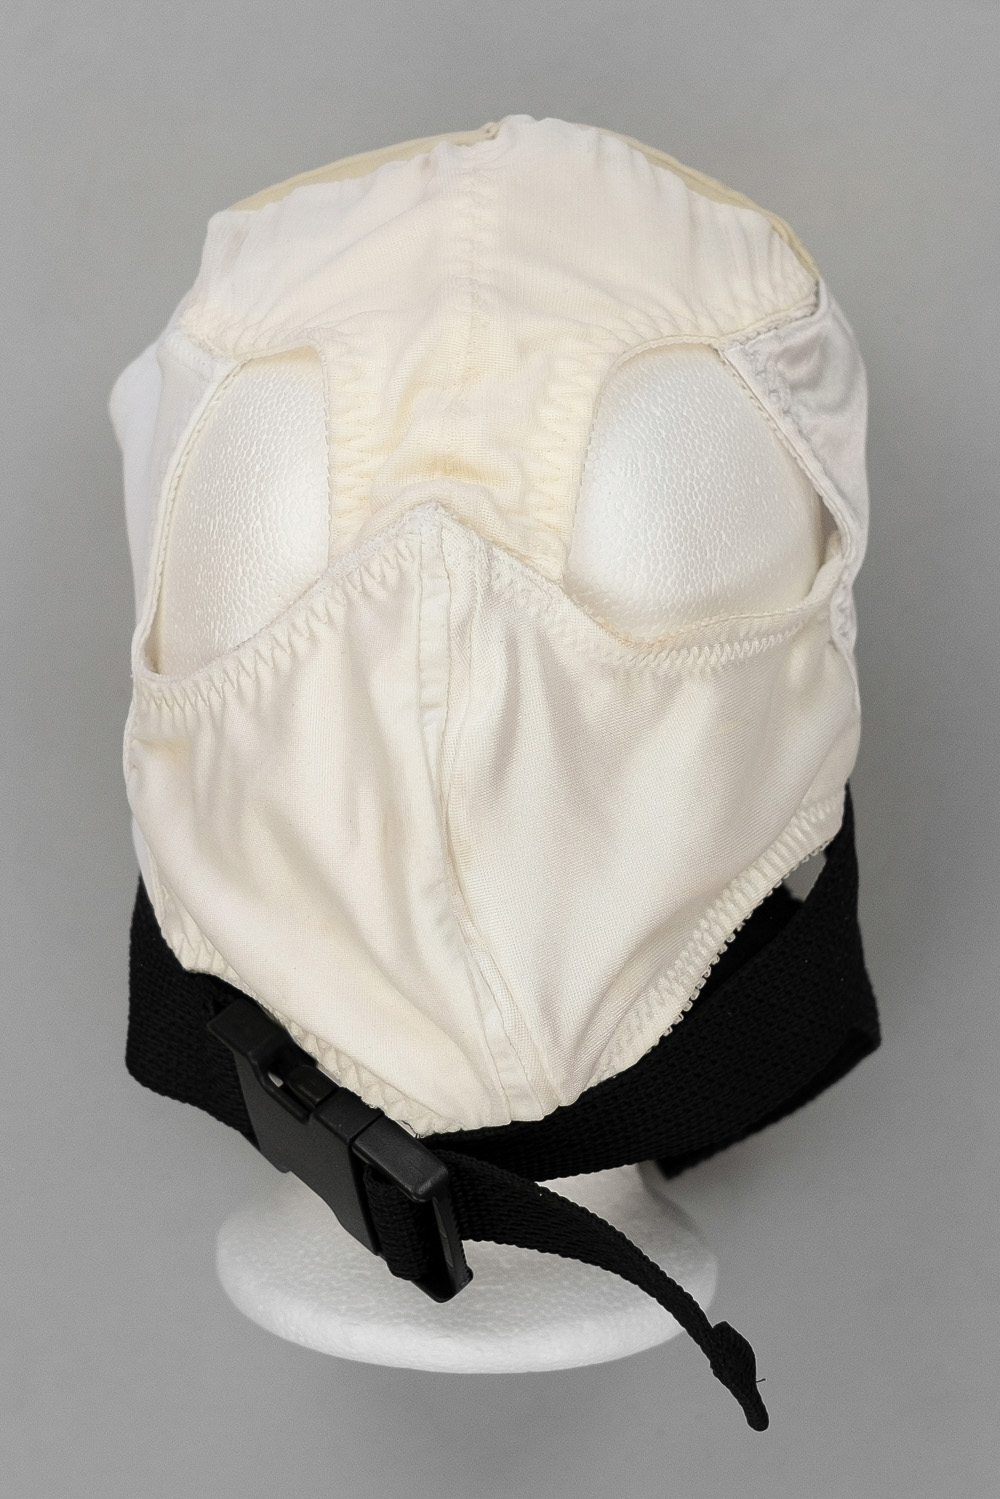 Gusset Mask in Black and White 10